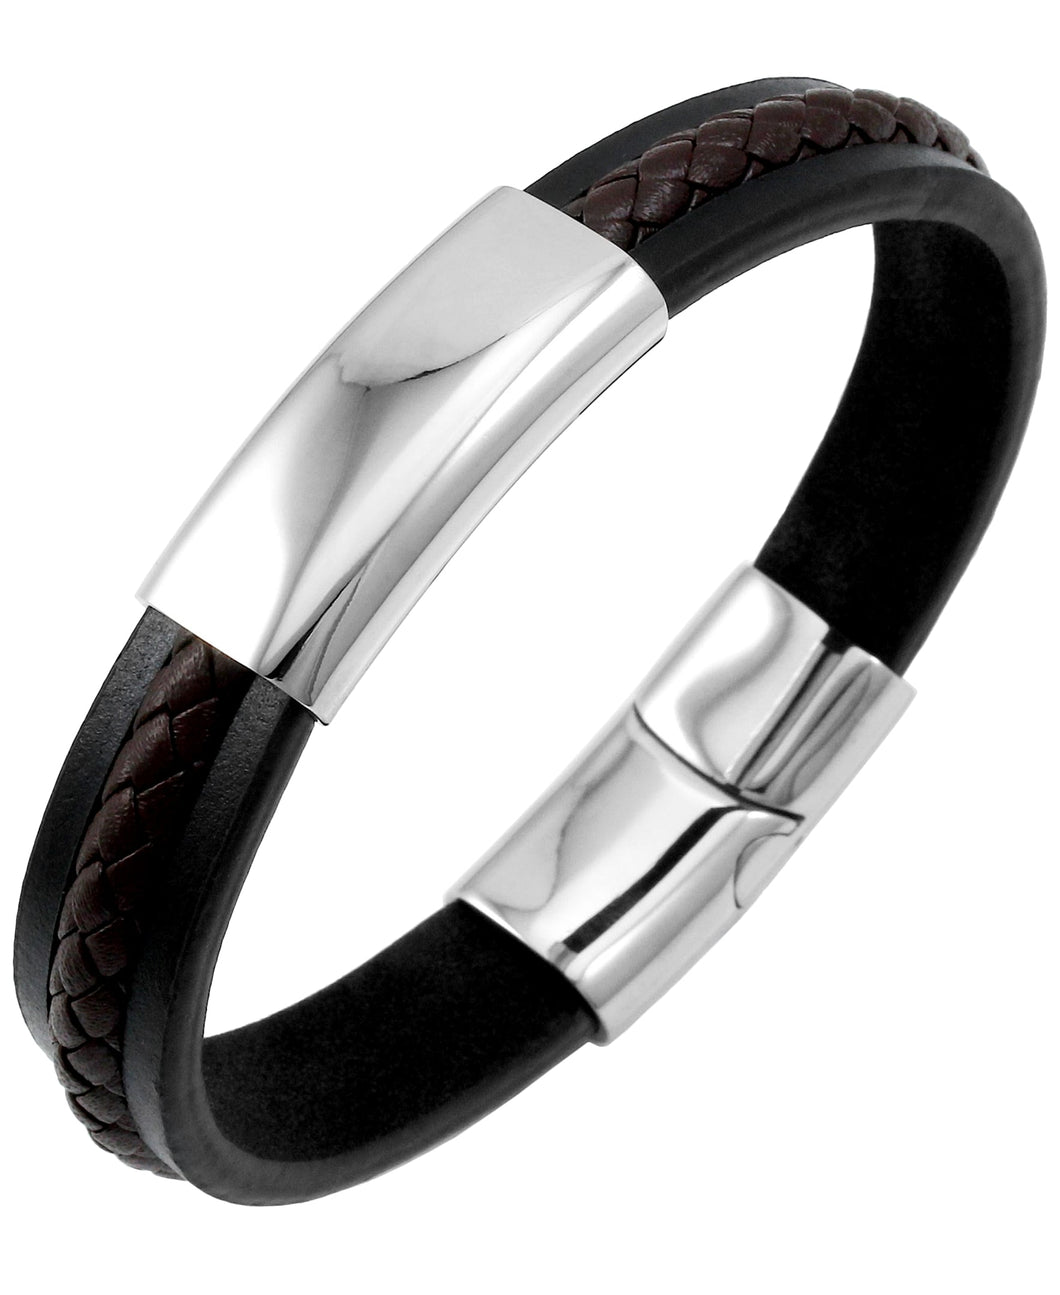 Sutton Stainless Steel Two-Tone Leather Bracelet With Braided Stripe Detail